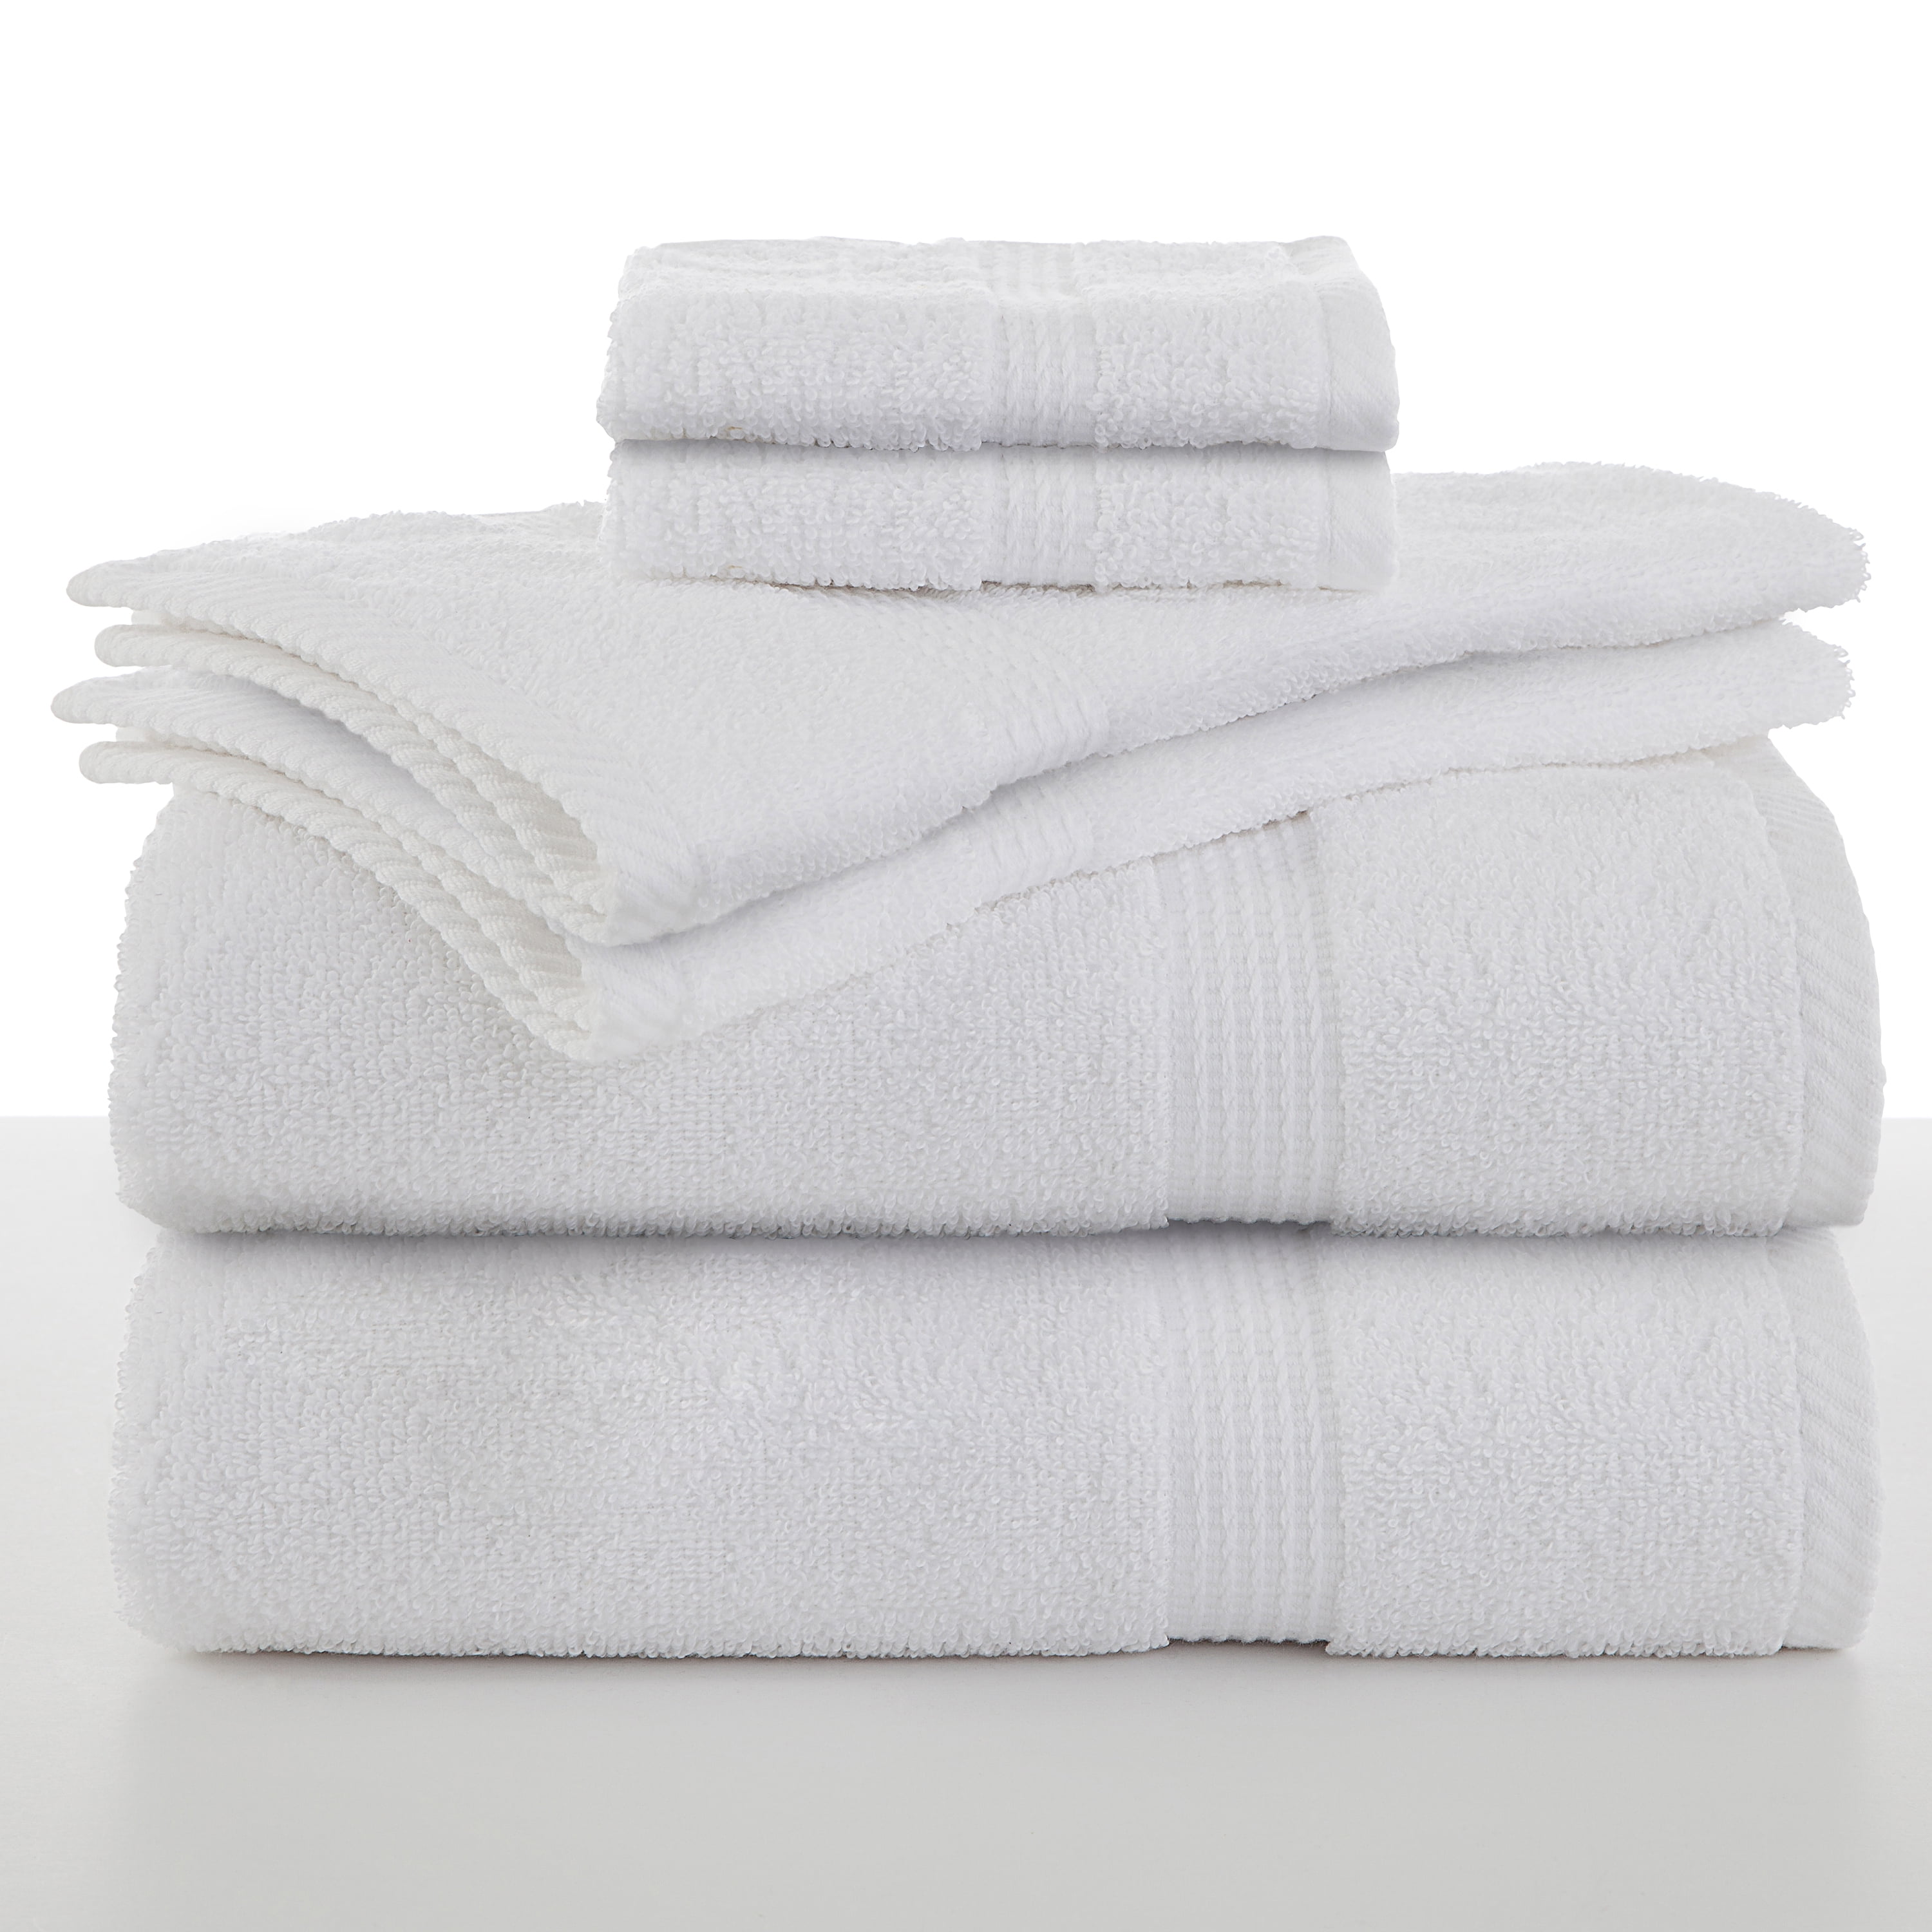 Utopia Towels 12 Bundle Pack - Bath Towel Set (6-Pack) and Hand Towels  (6-Pack)-100% Ring-Spun Cotton-Highly Absorbent–Soft & Luxuriou-White